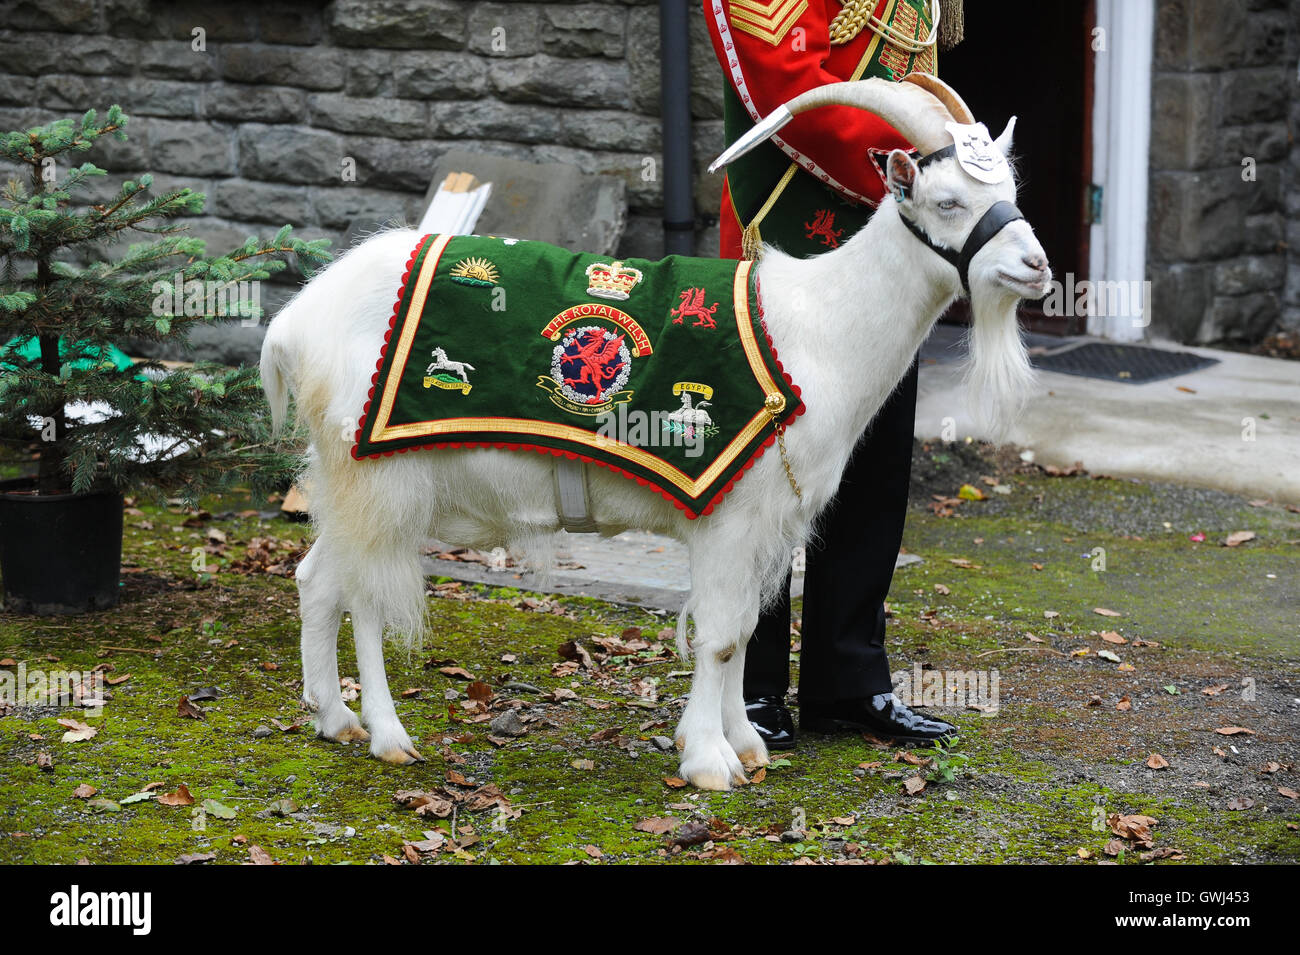 Swansea, Wales, UK. Alamy Stock. Royal Welsh 3rd Battalion (formerly The Royal Welsh Regiment) mascot, Shenkin the Goat. Stock Photo